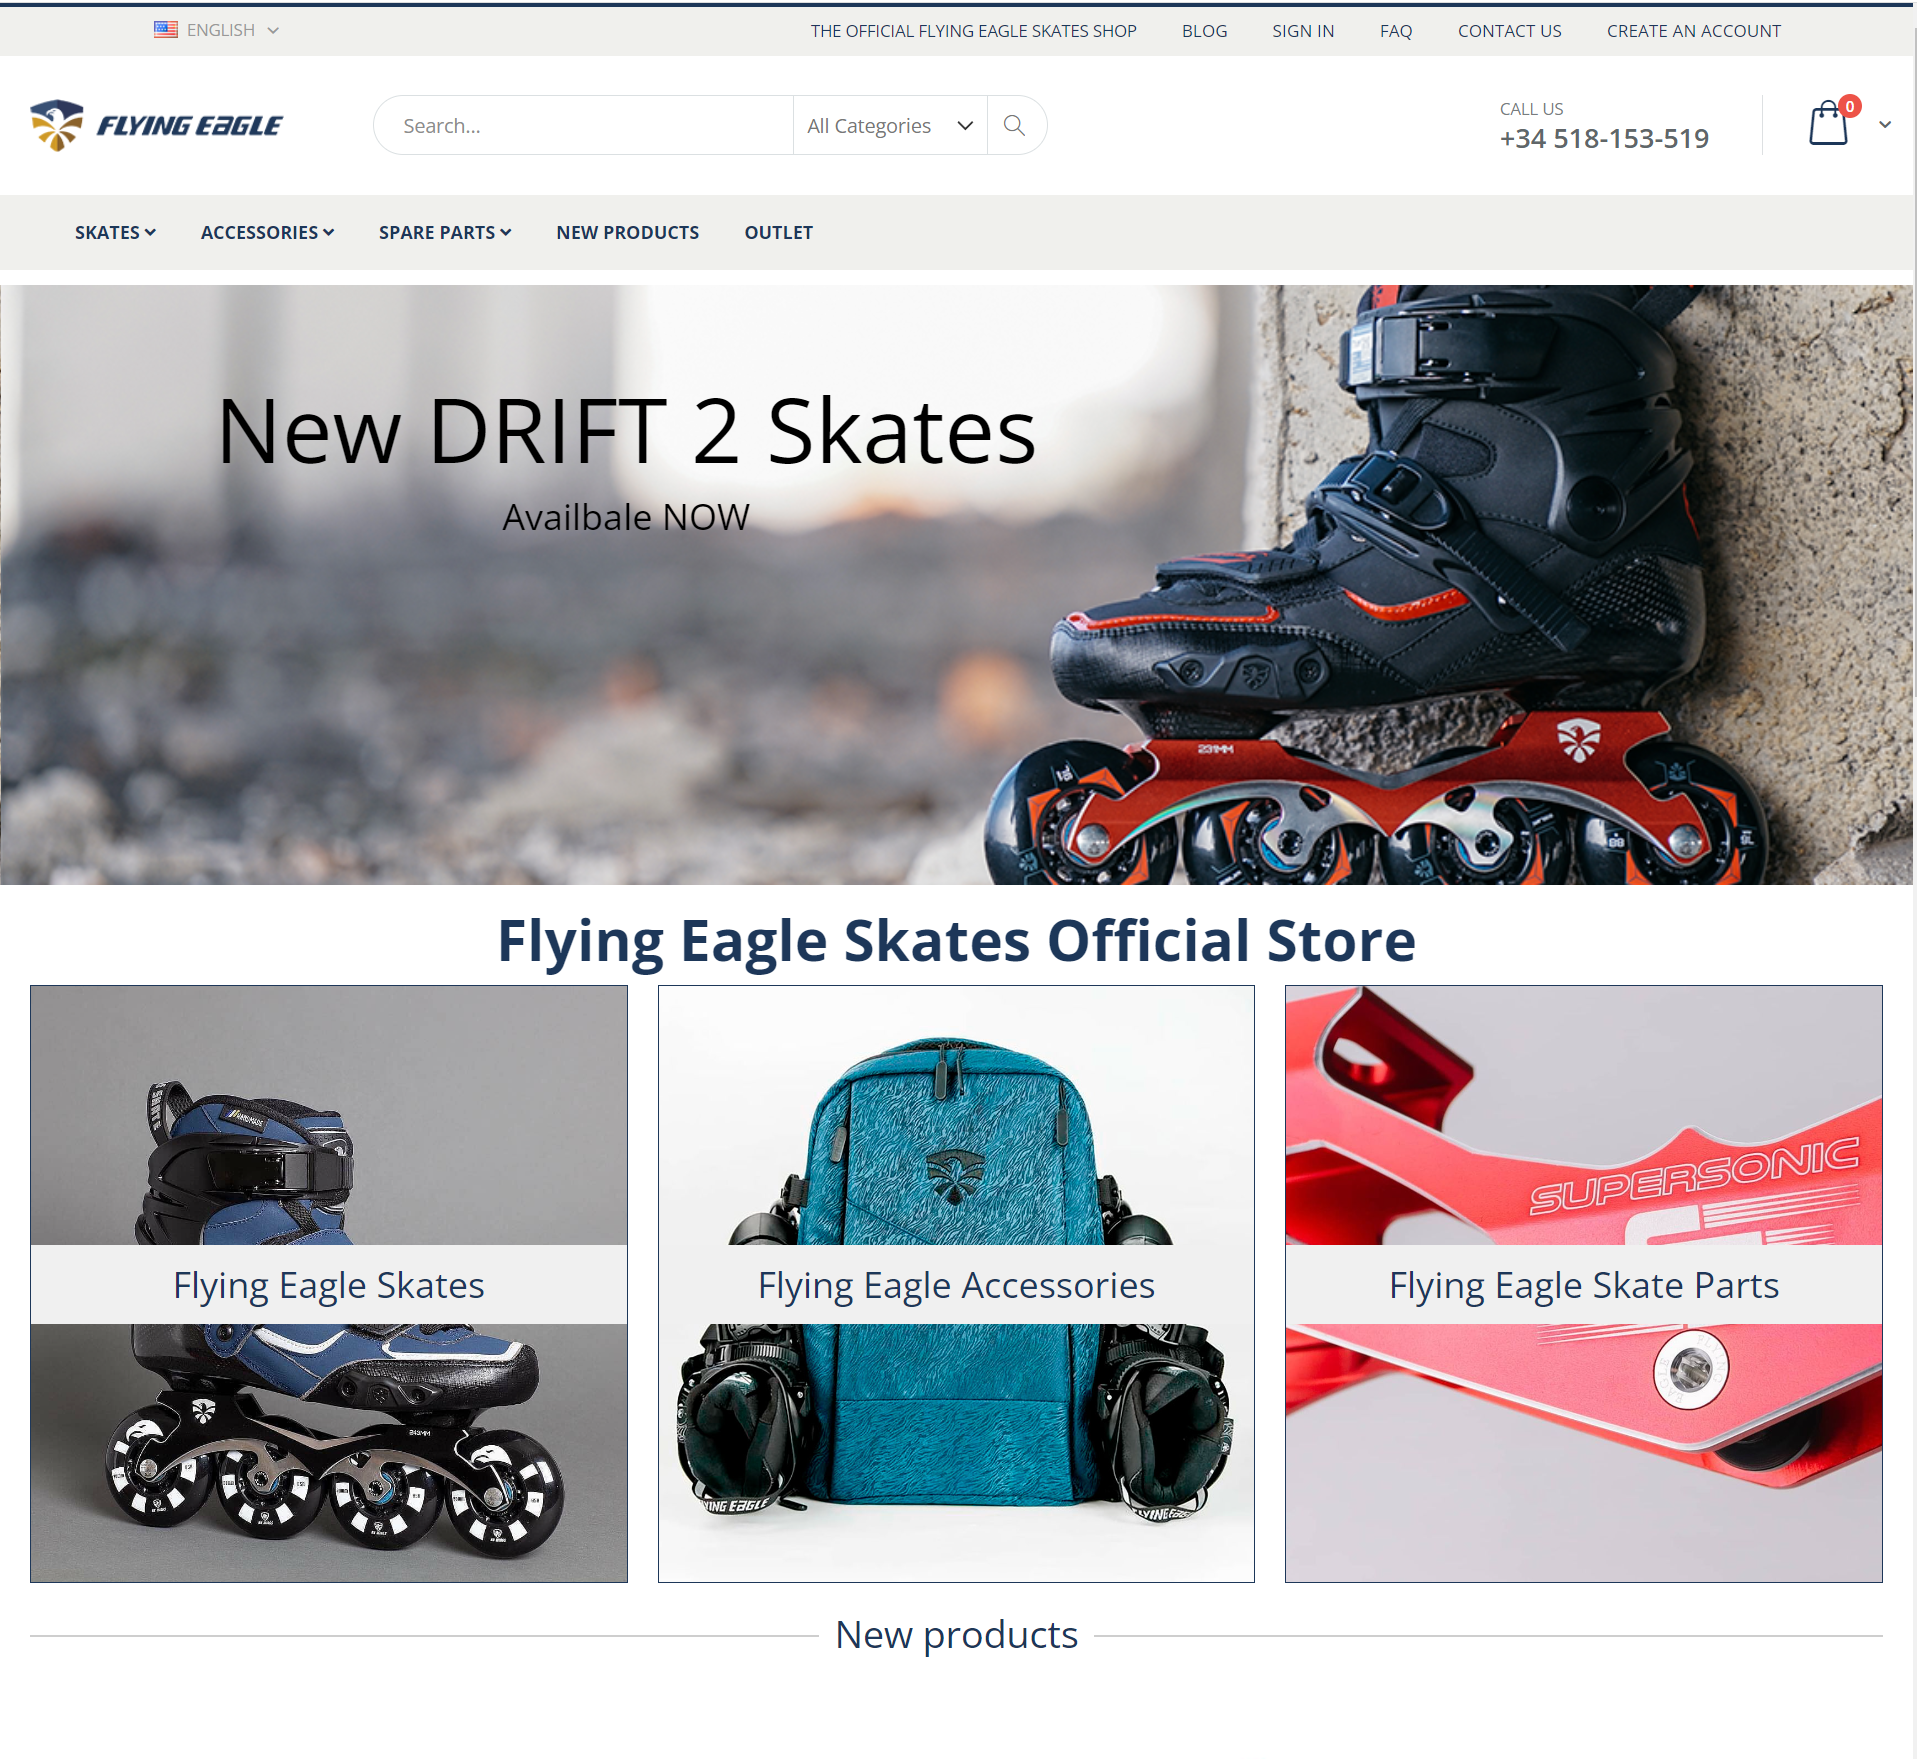 New official Flying Eagle Store - Inlineonline